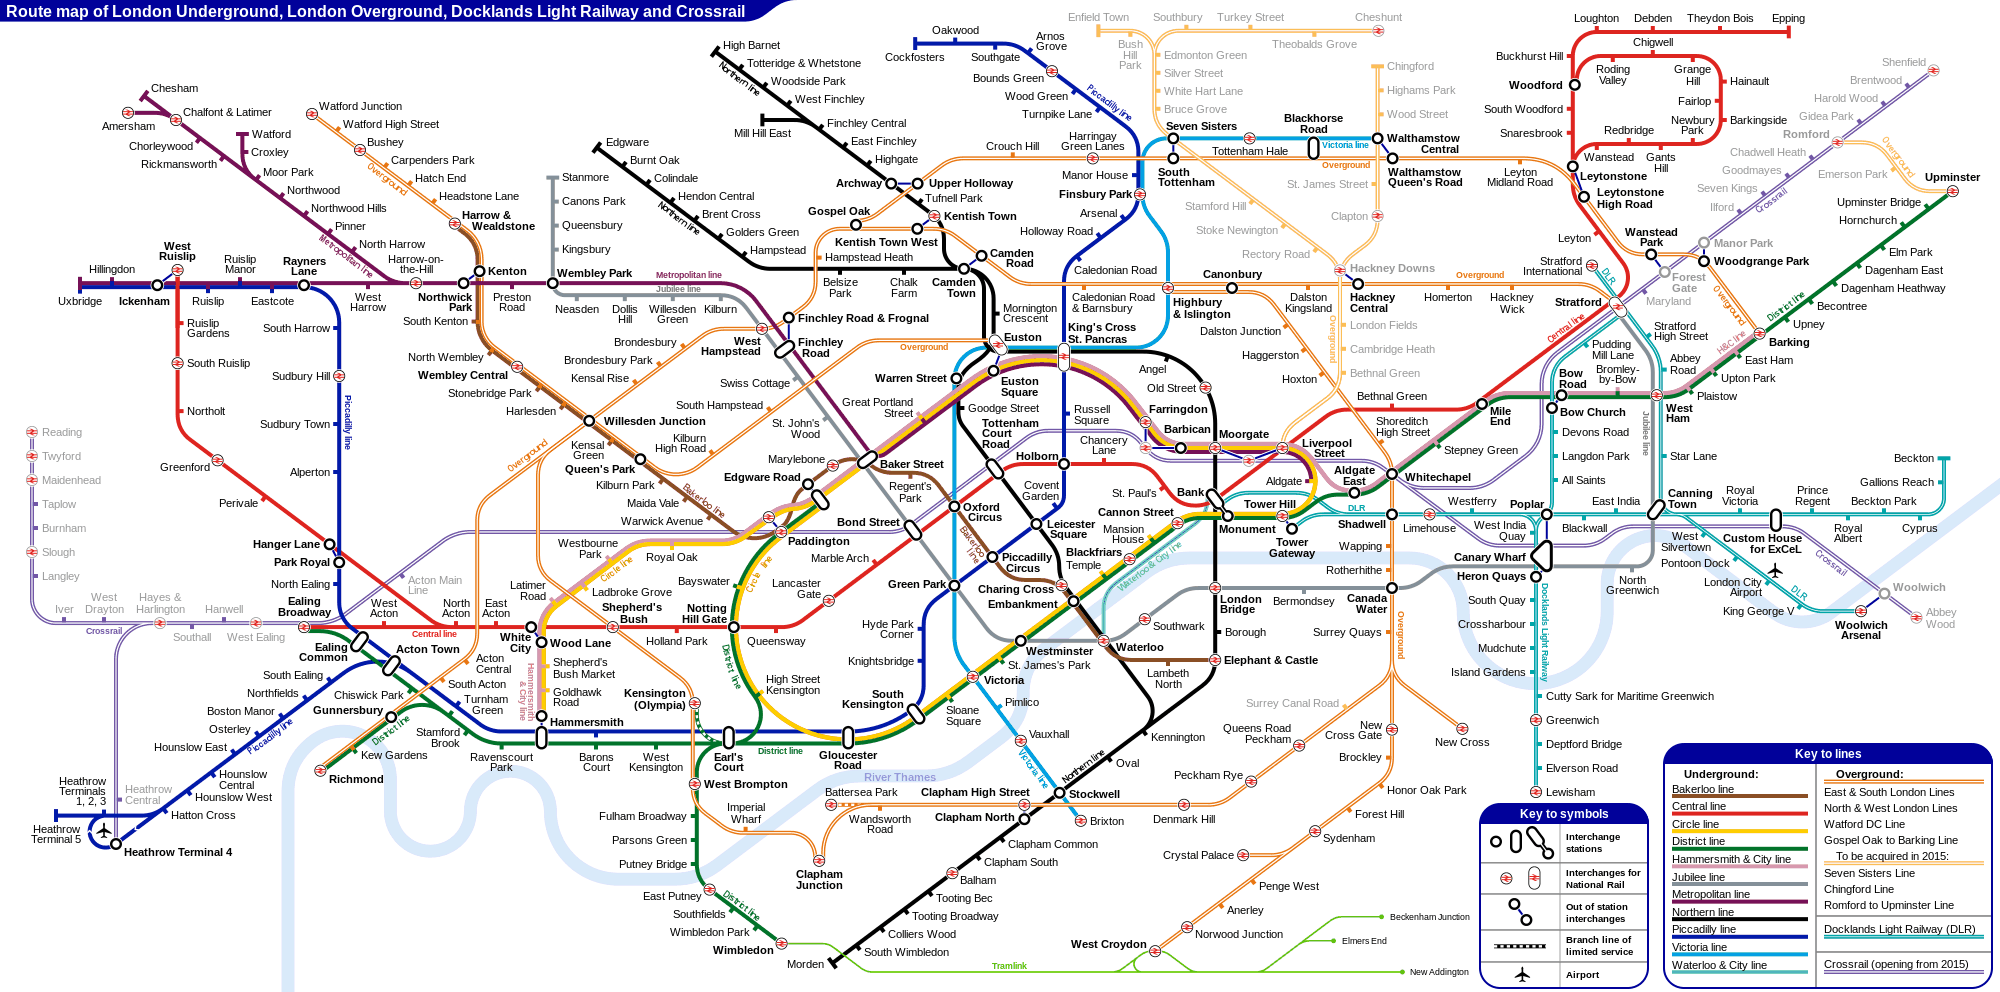 London Overground Map and Guide